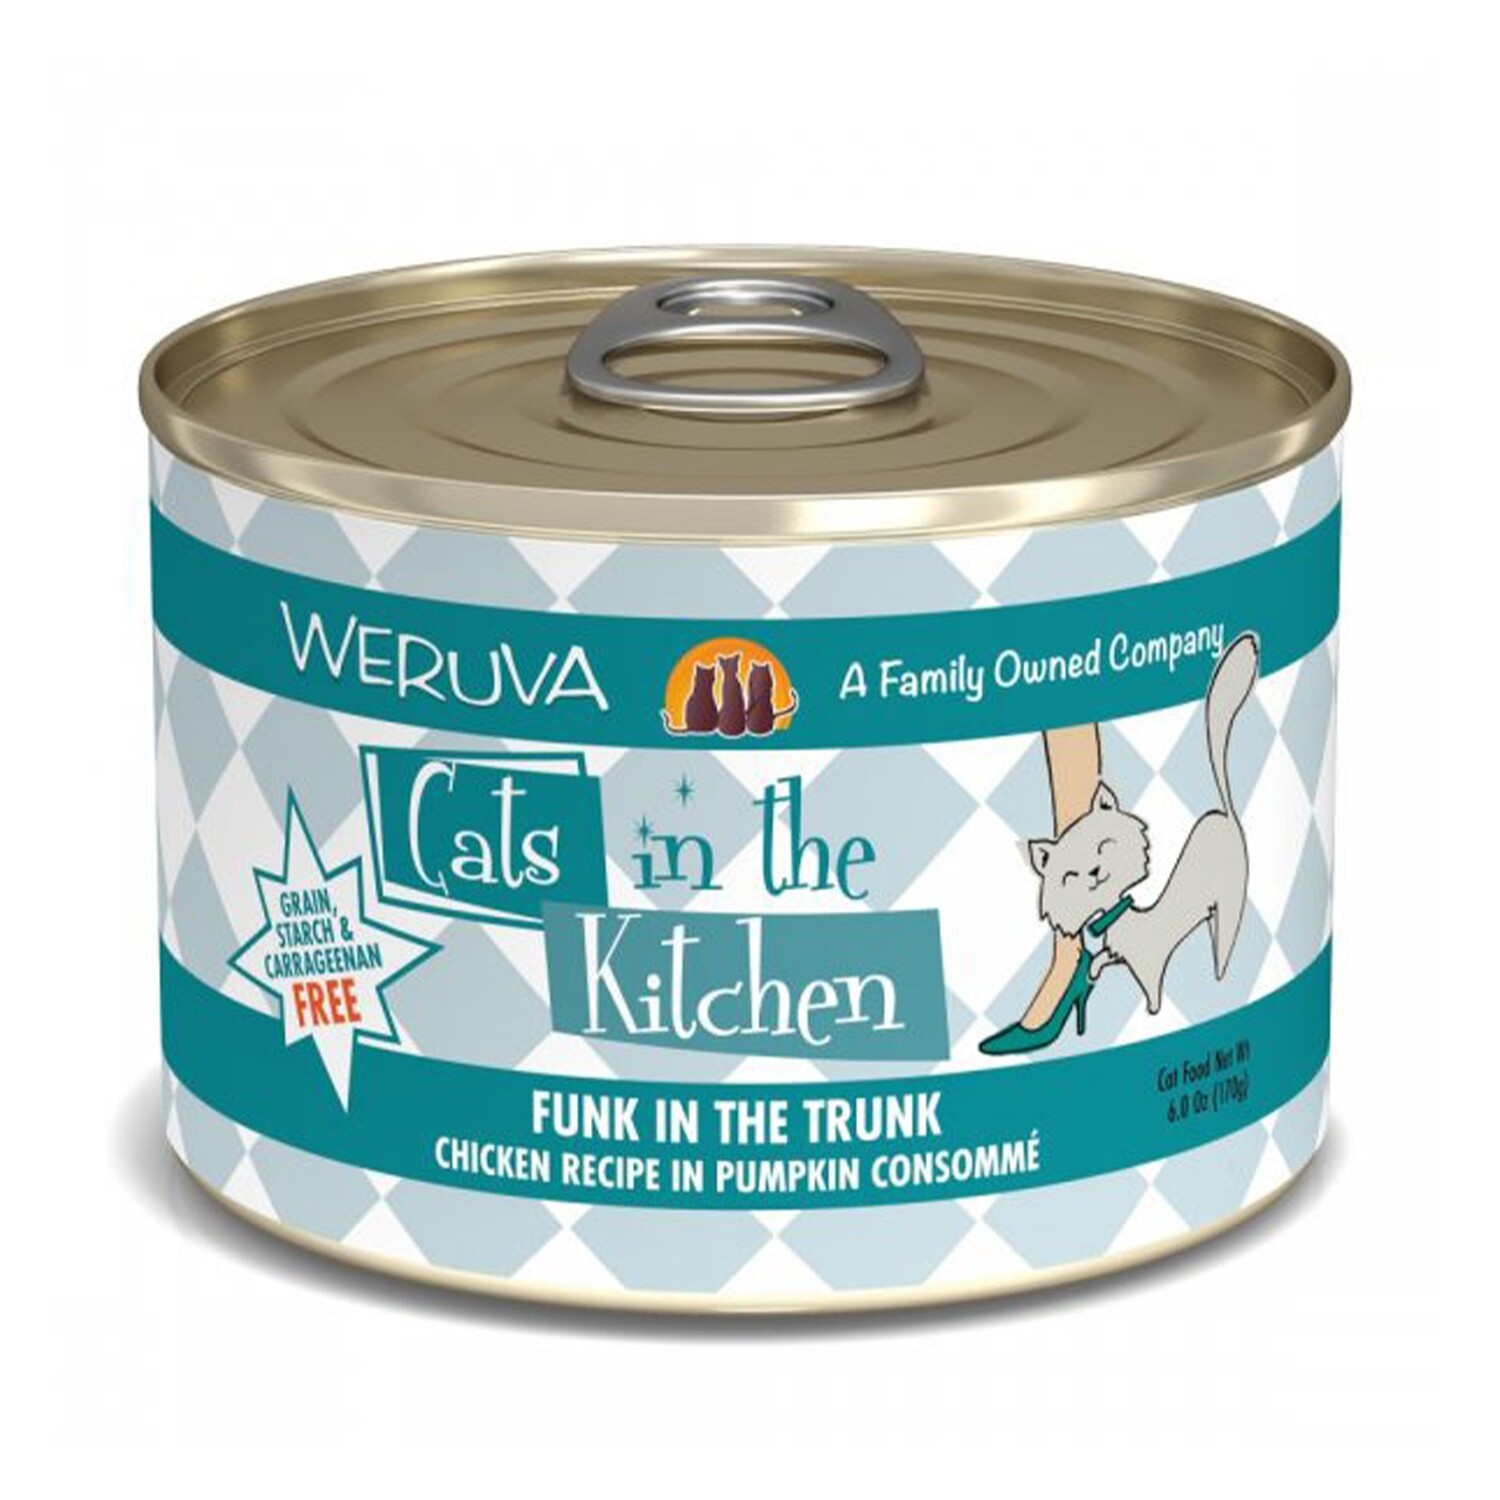 Weruva Cats in the Kitchen Funk in the Trunk Canned Cat Food-3.2oz - 鸡肉南瓜汤猫罐头